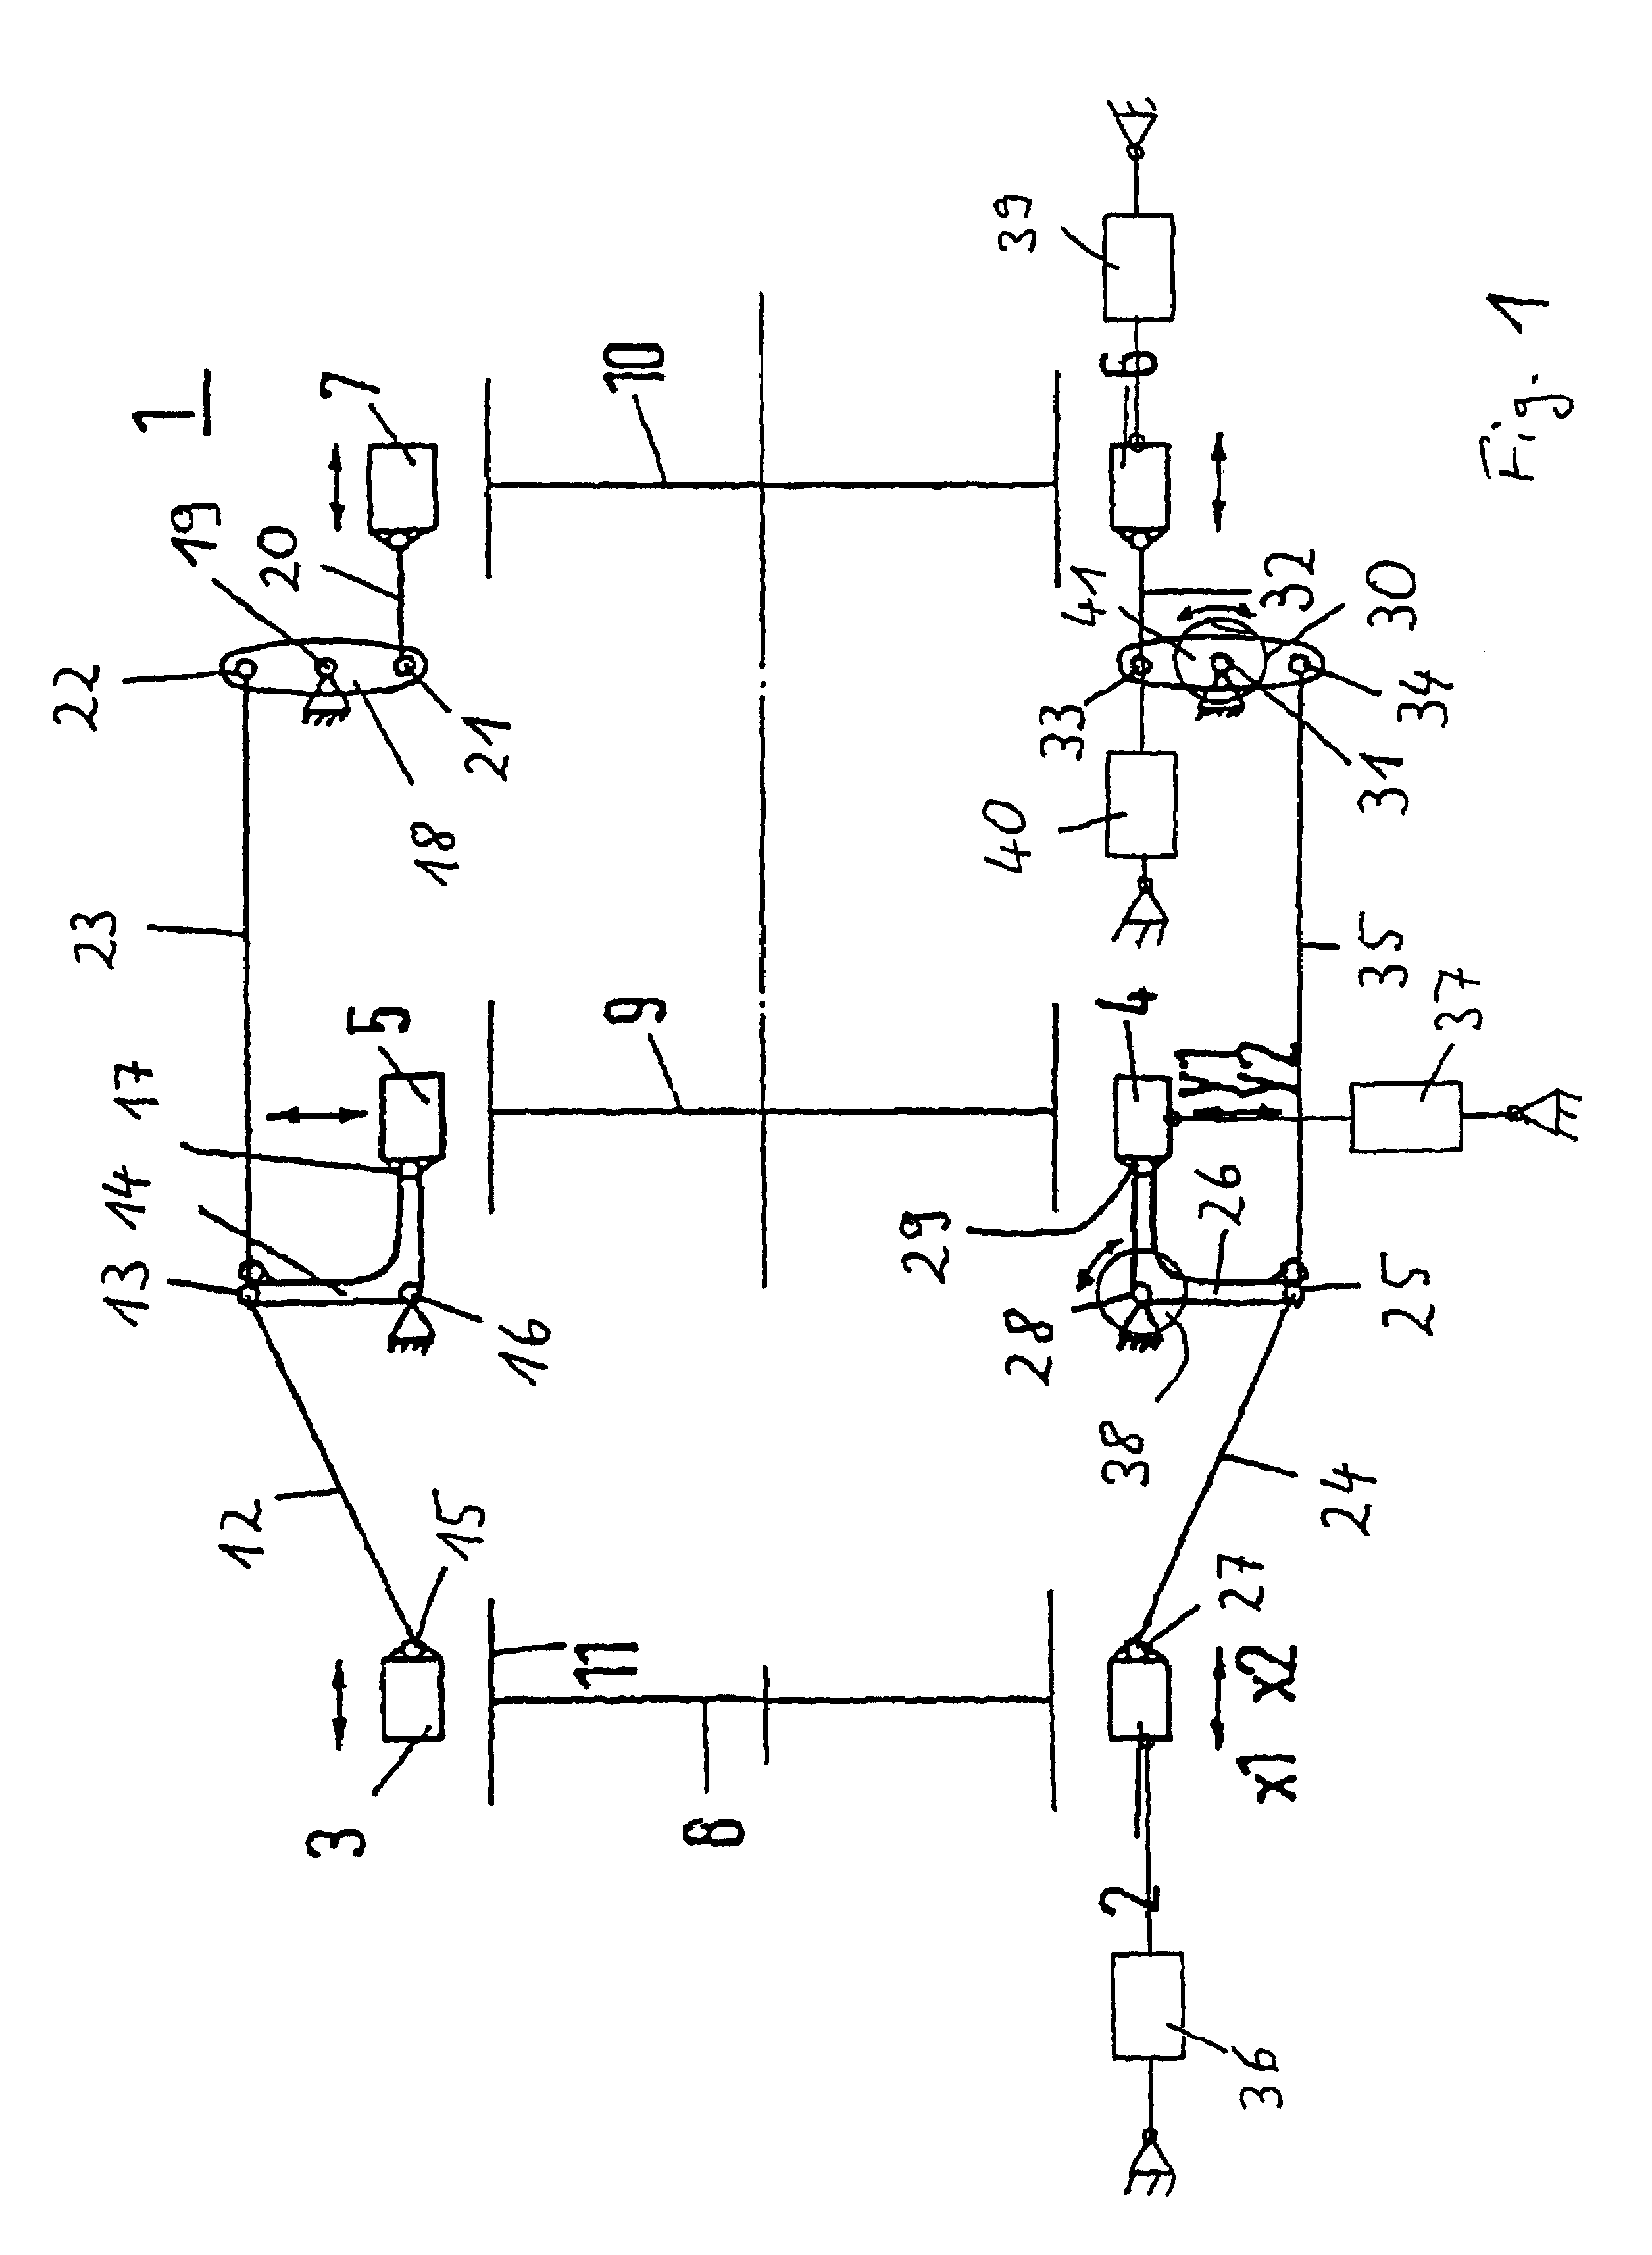 Method and device for active radial control of wheel pairs or wheel sets on vehicles